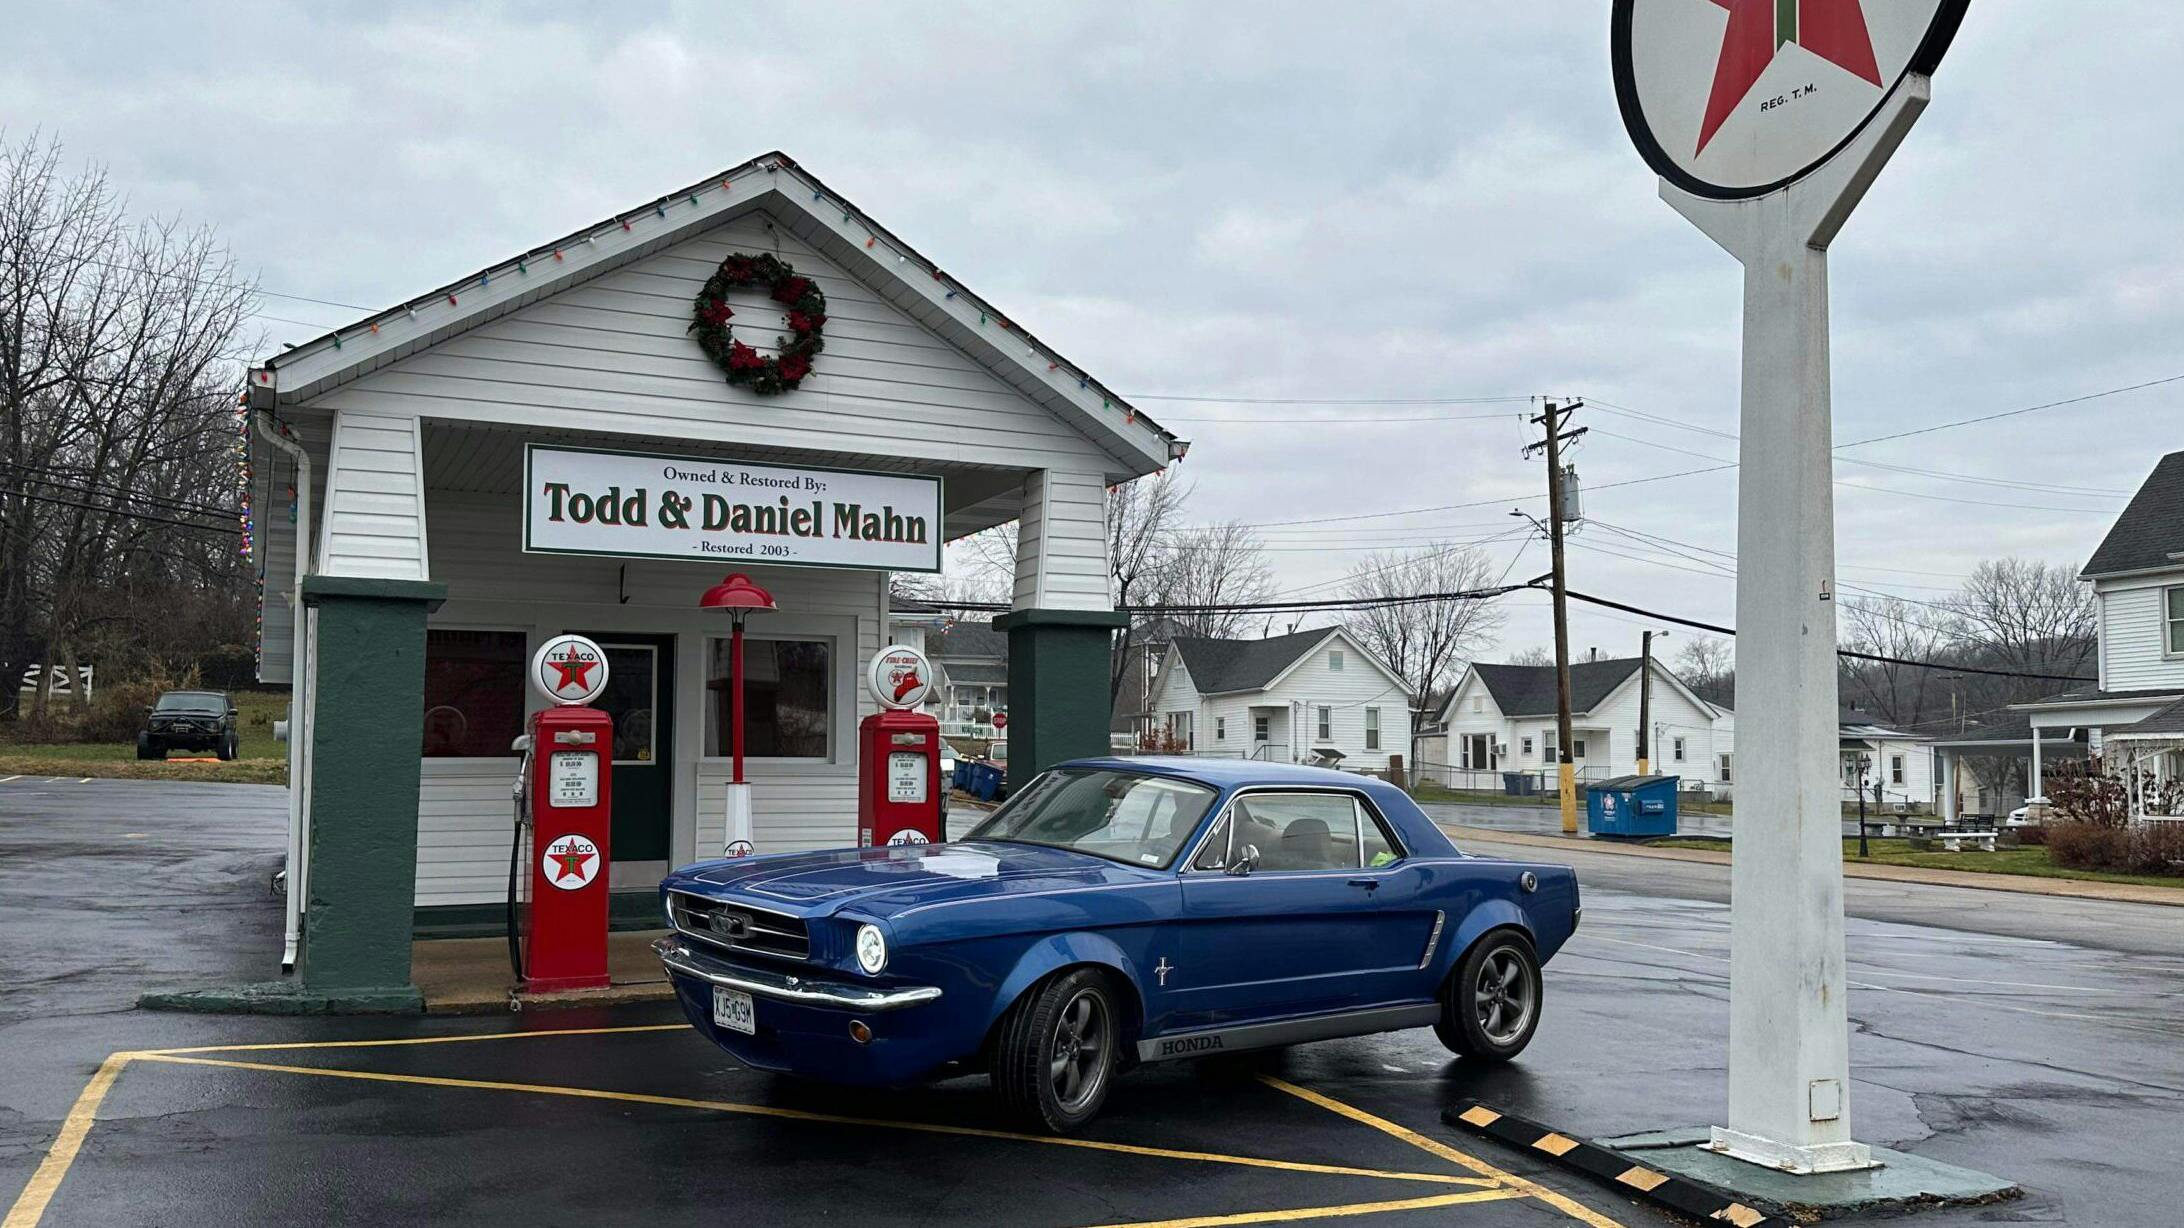 This Mustang-bodied Honda successfully trolled the Internet